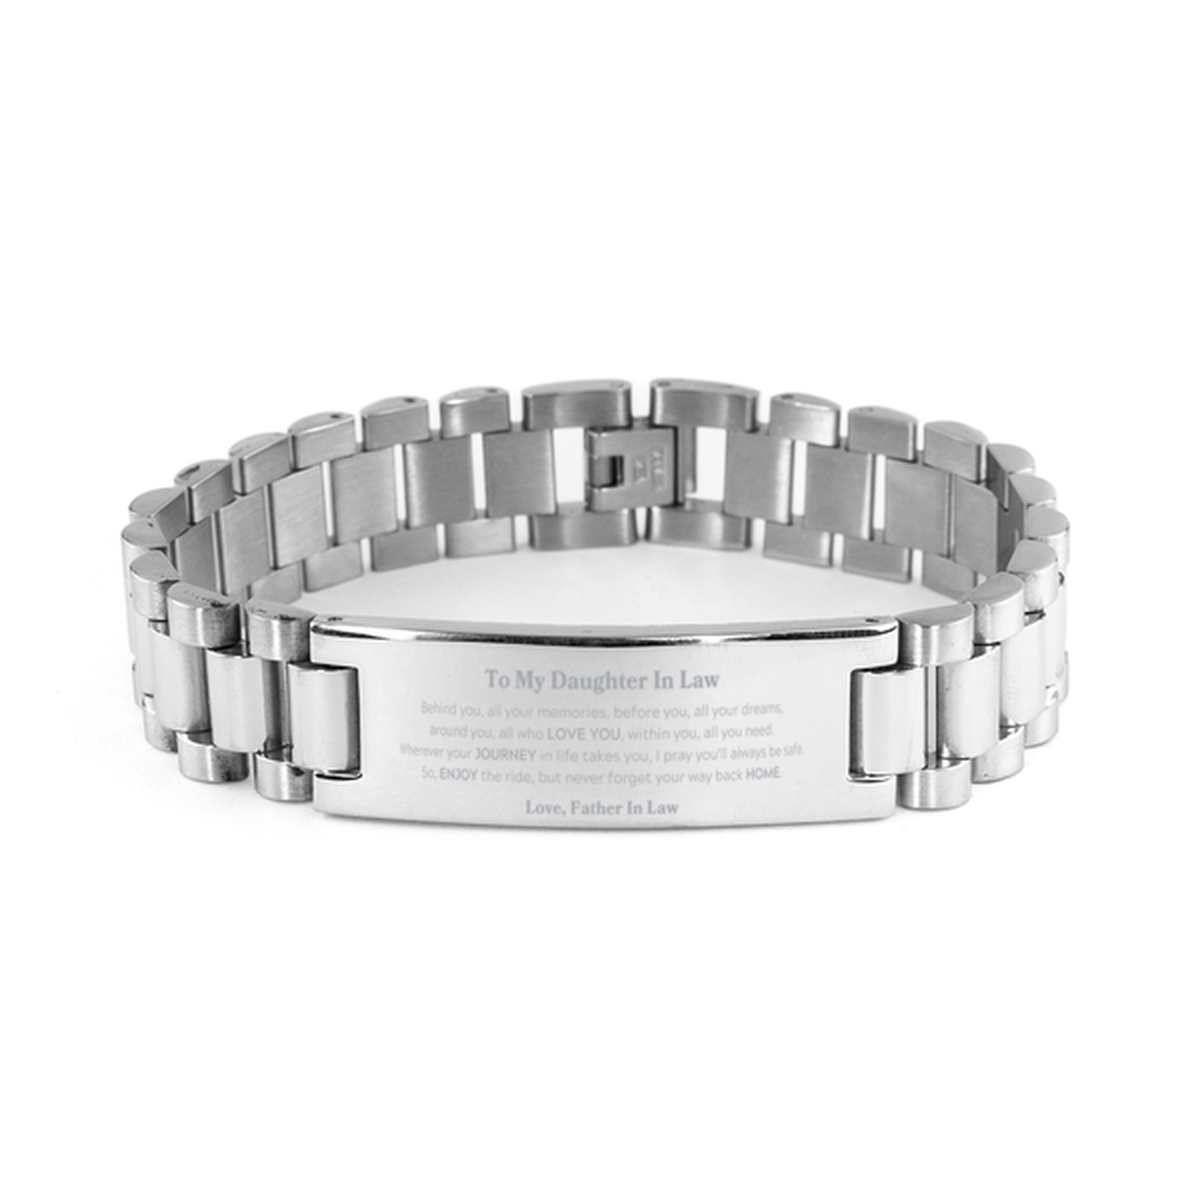 To My Daughter In Law Graduation Gifts from Father In Law, Daughter In Law Ladder Stainless Steel Bracelet Christmas Birthday Gifts for Daughter In Law Behind you, all your memories, before you, all your dreams. Love, Father In Law